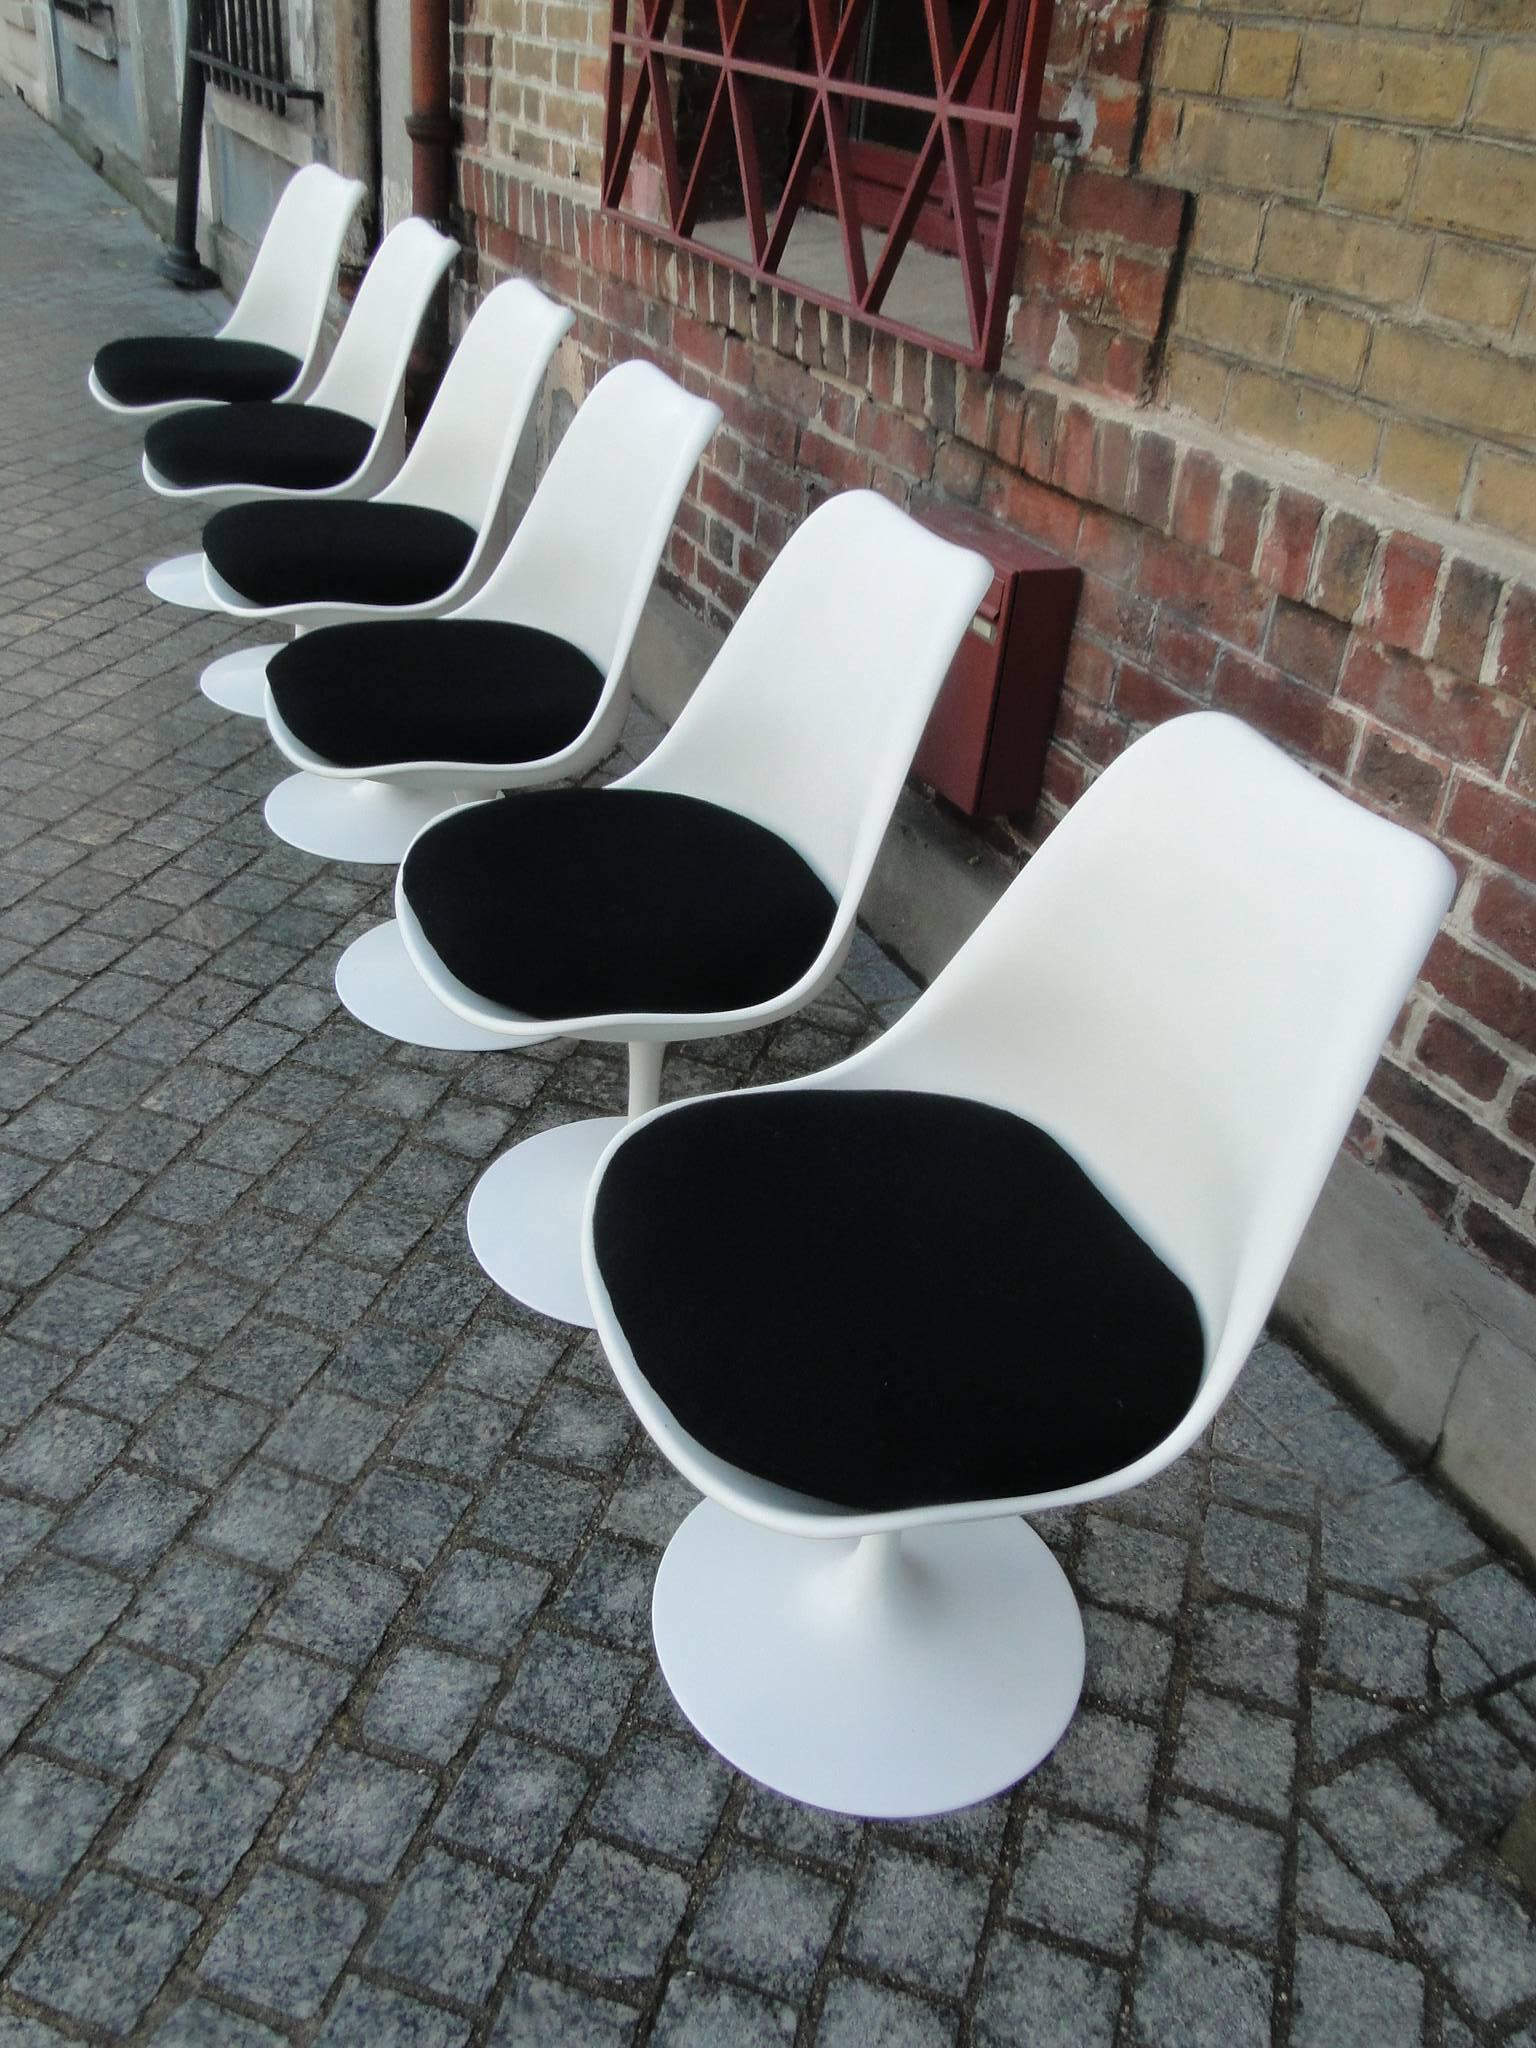 Set of six swivel dining chairs, in white metal, fibre glass, by Eero Saarinen for Knoll International, United States, design 1958, production 1960s.

These six chairs with new Fabric seats are from the Tulip collection and were designed by Eero